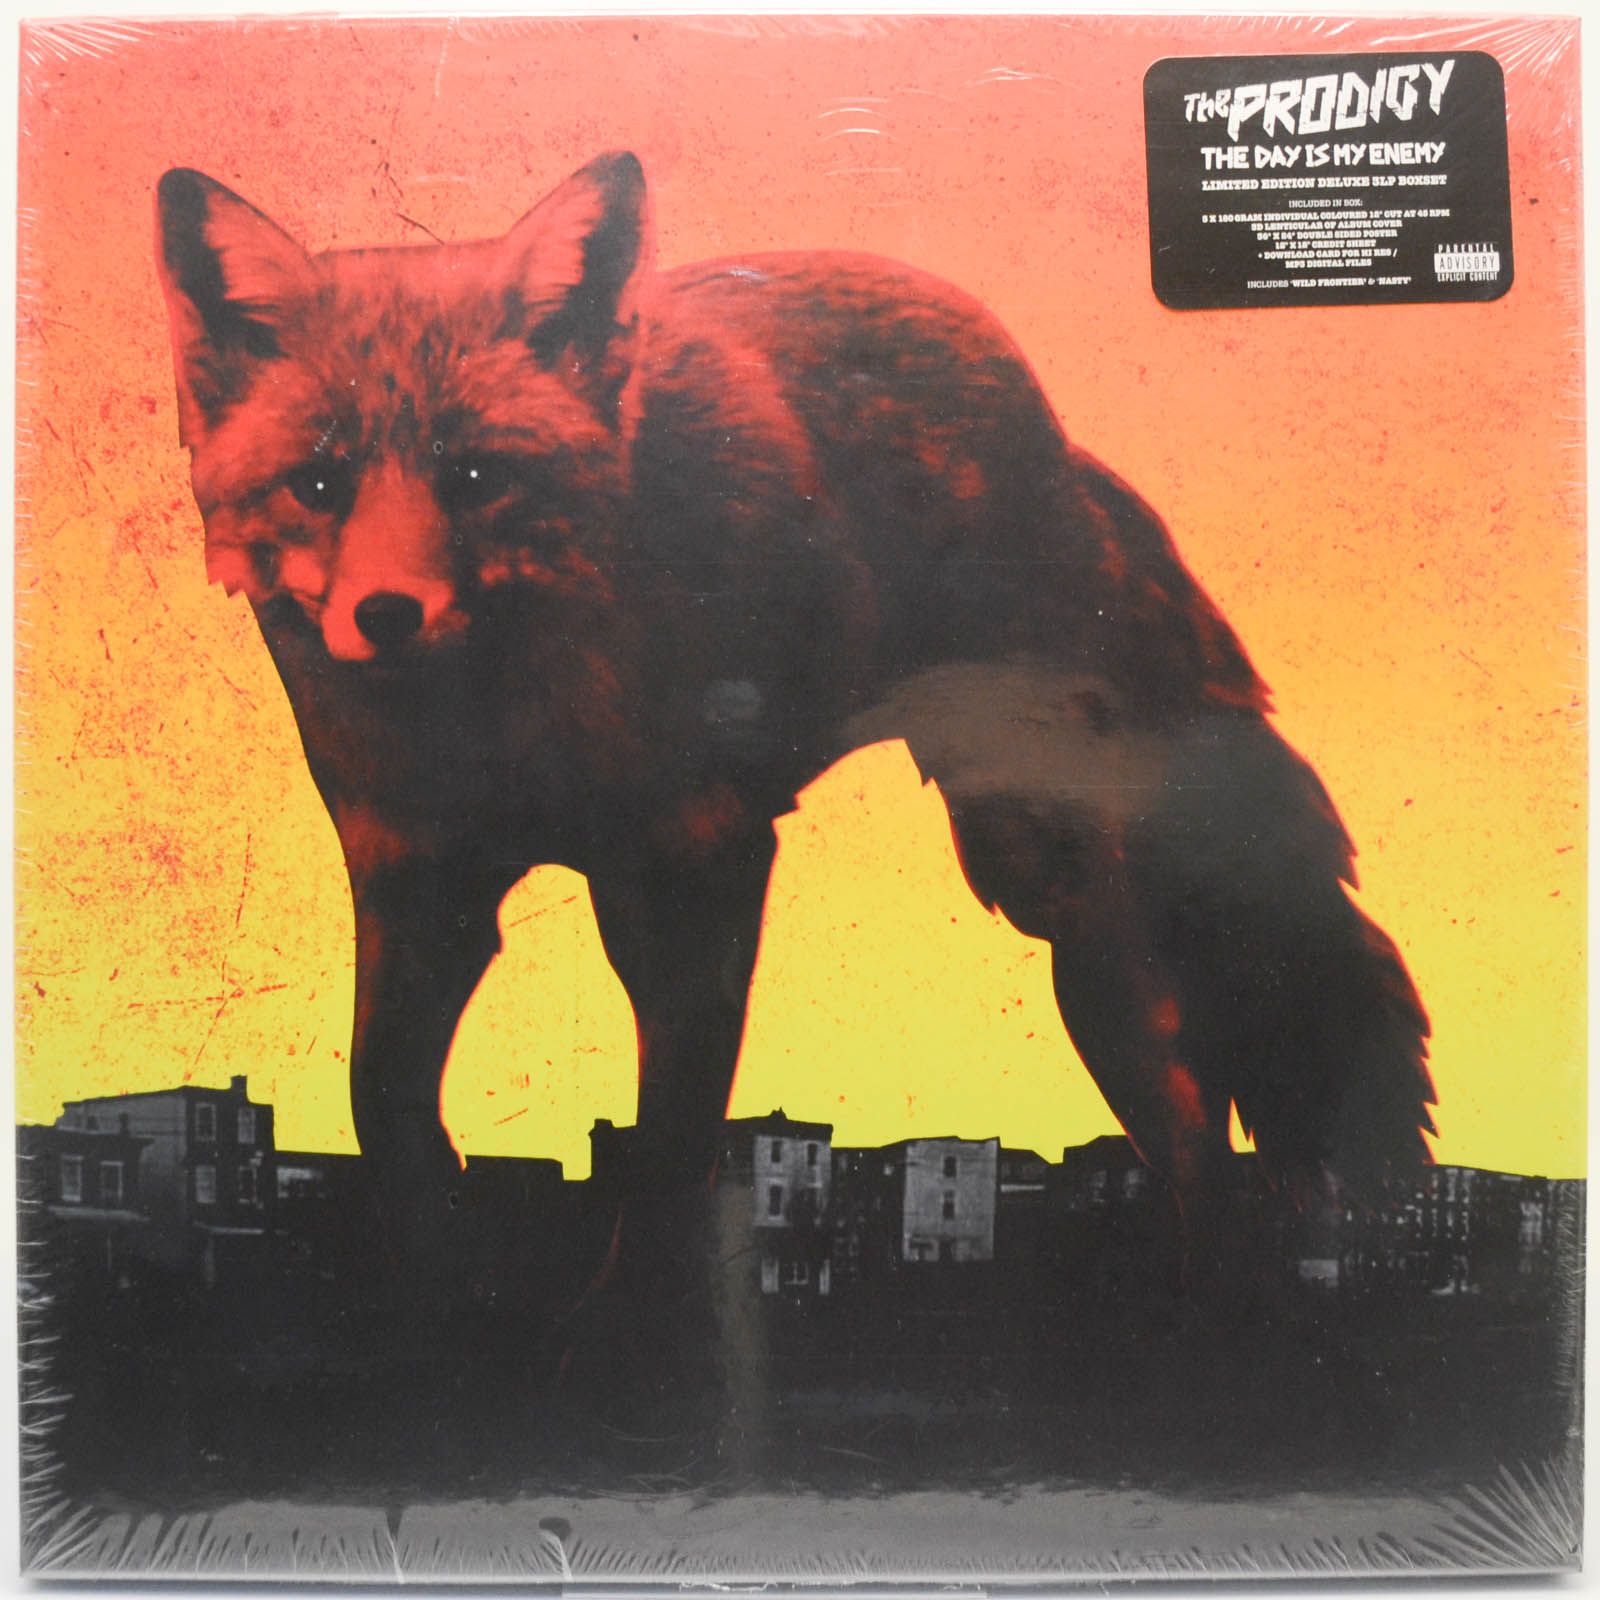 Prodigy - The Day Is My Enemy (3LP, Box-Set, Deluxe), 16360.